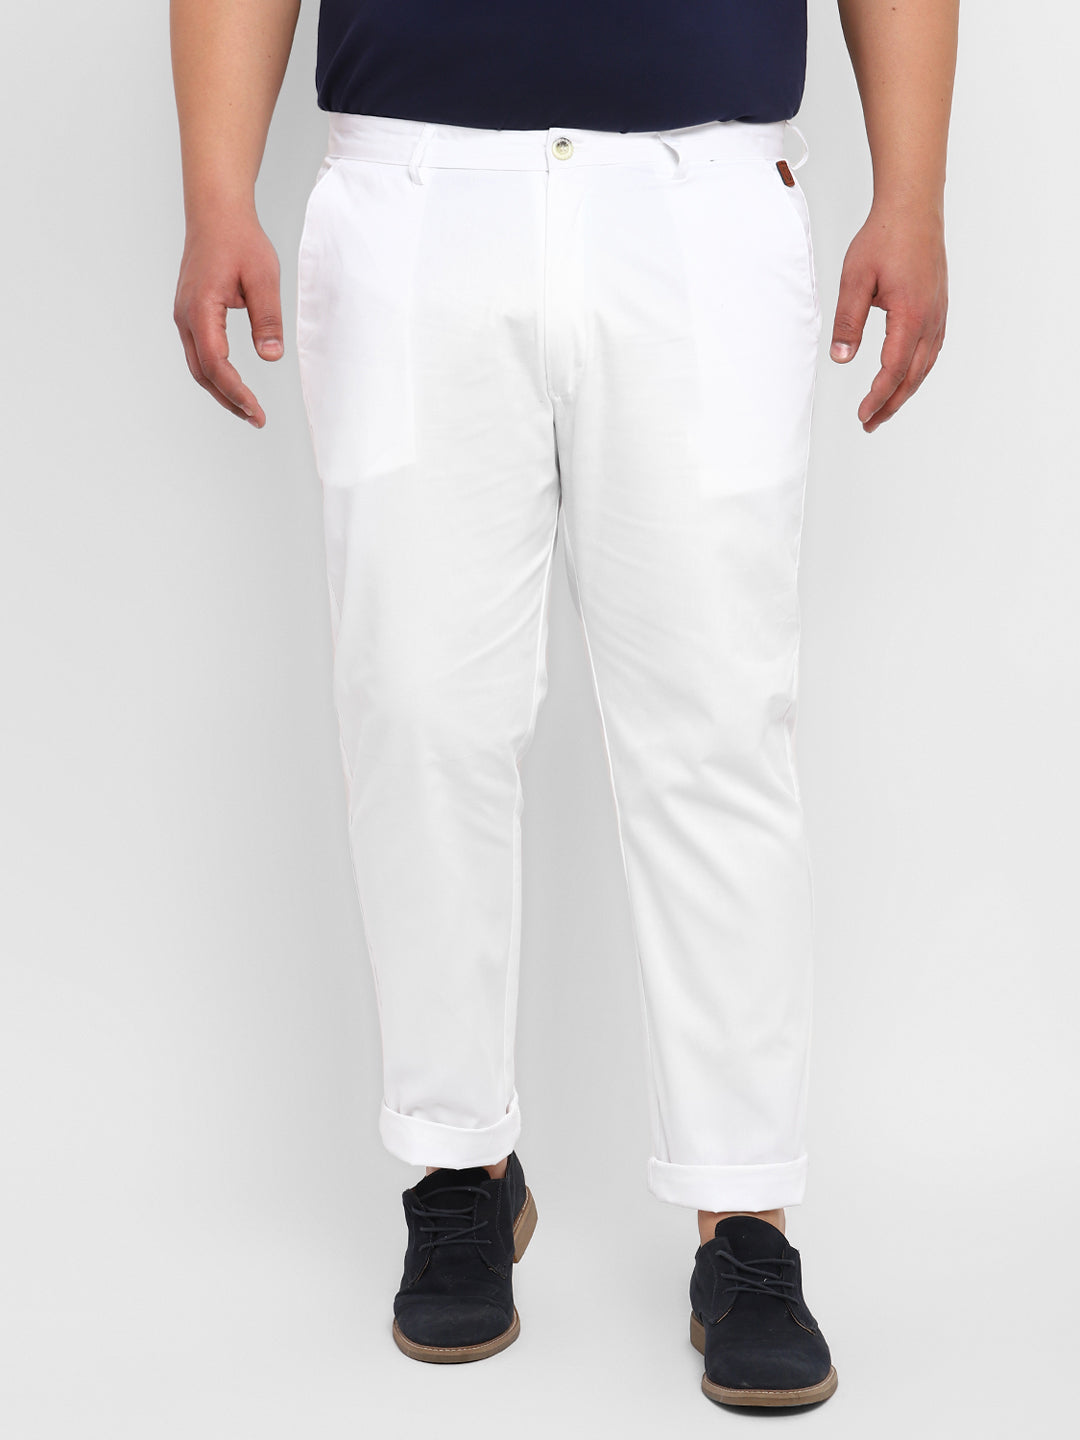 Plus Men's White Cotton Light Weight Non-Stretch Regular Fit Casual Trousers